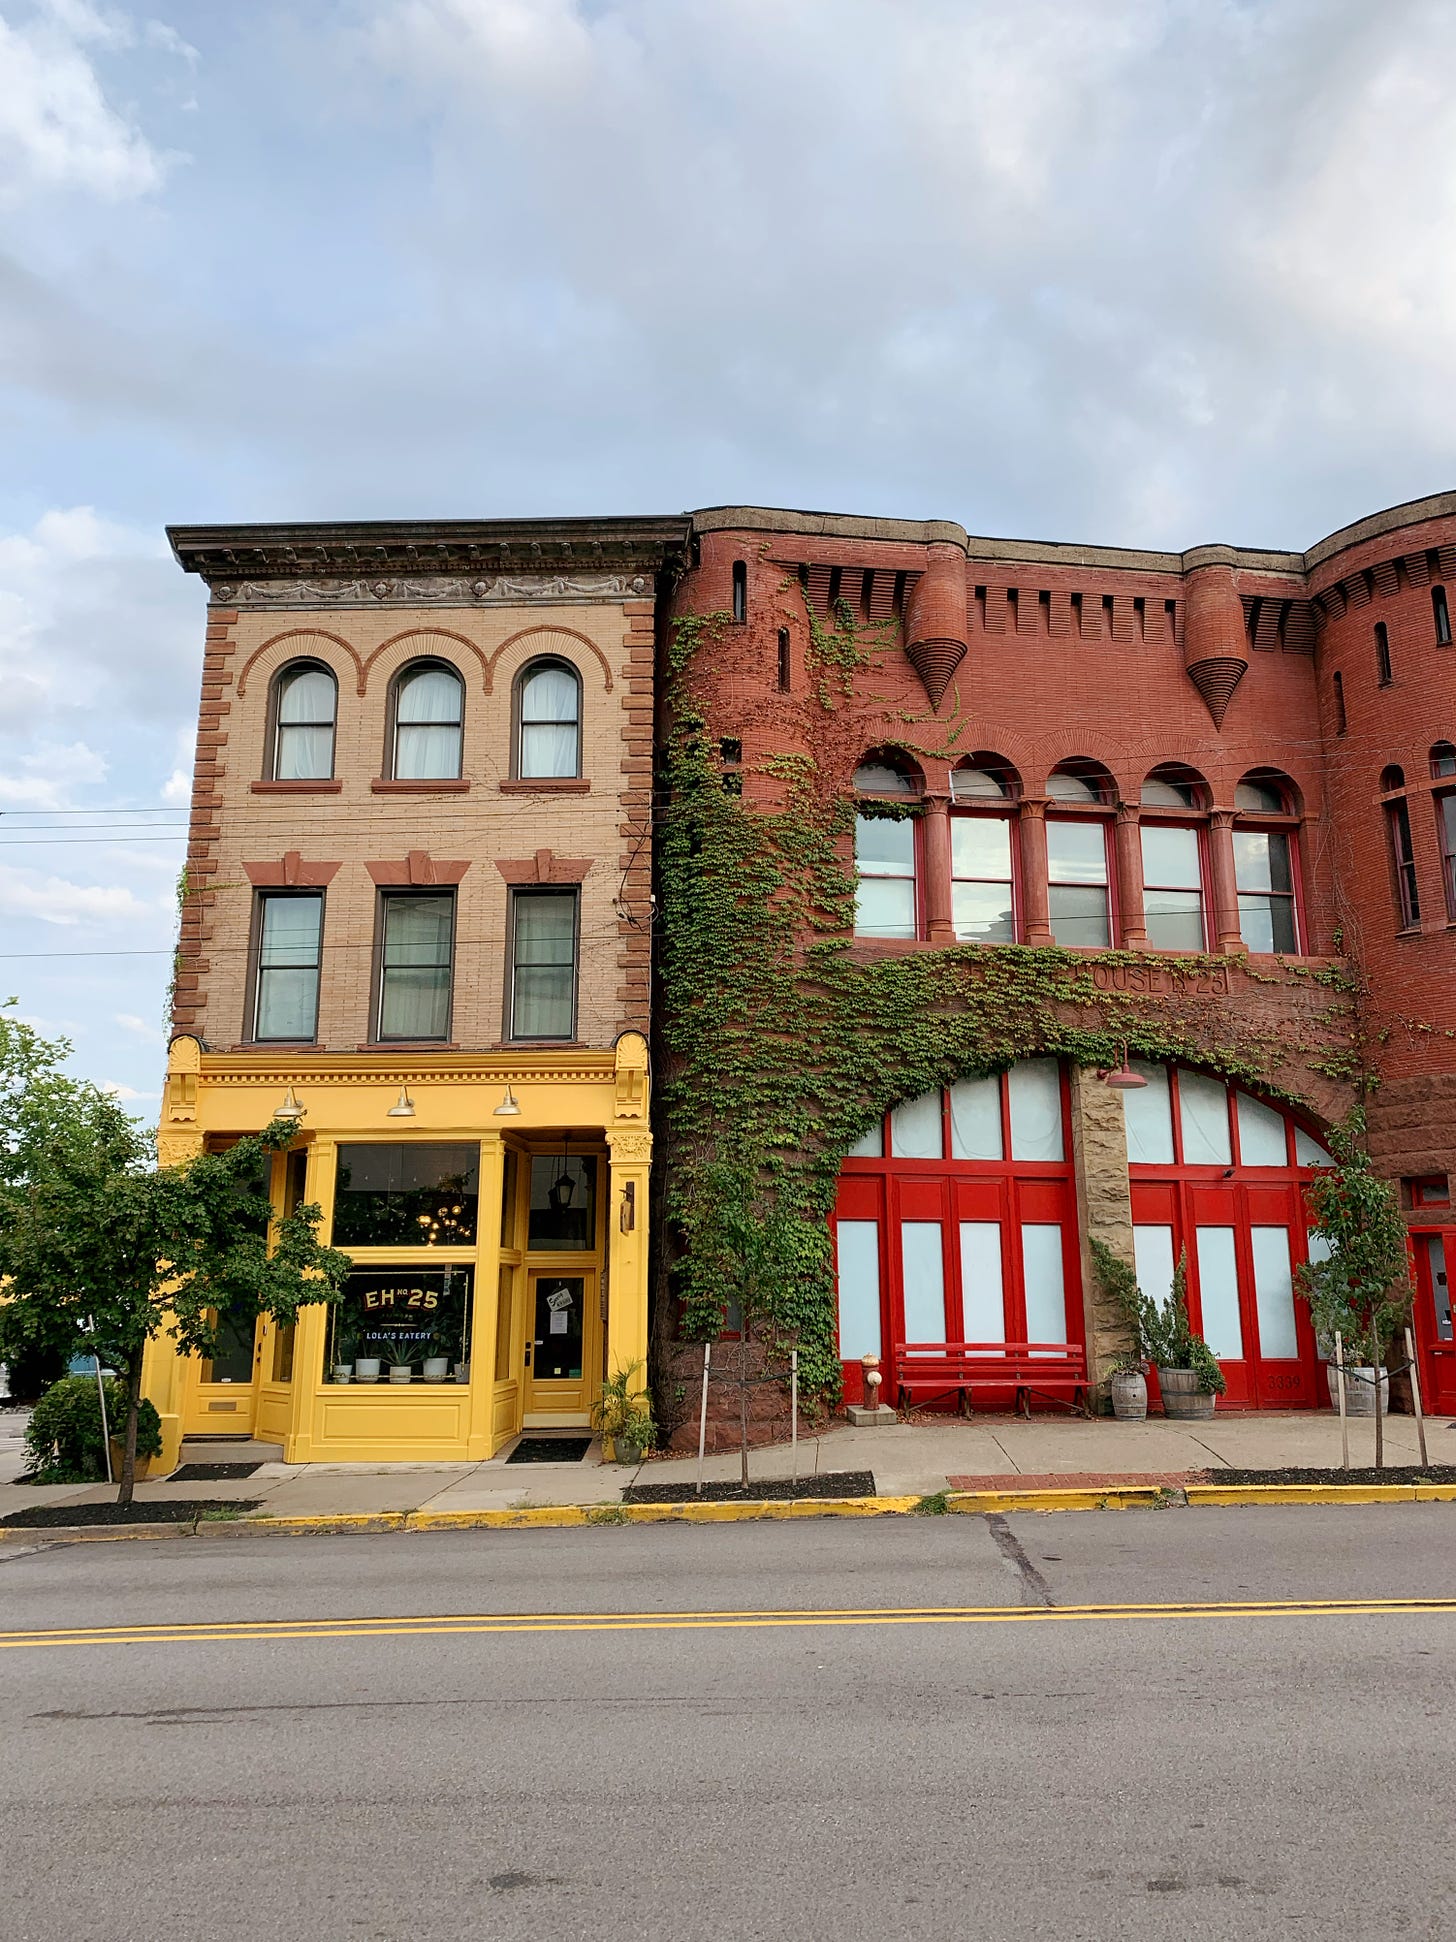 3-story building with painted yellow front and a brick building with ivy all over it